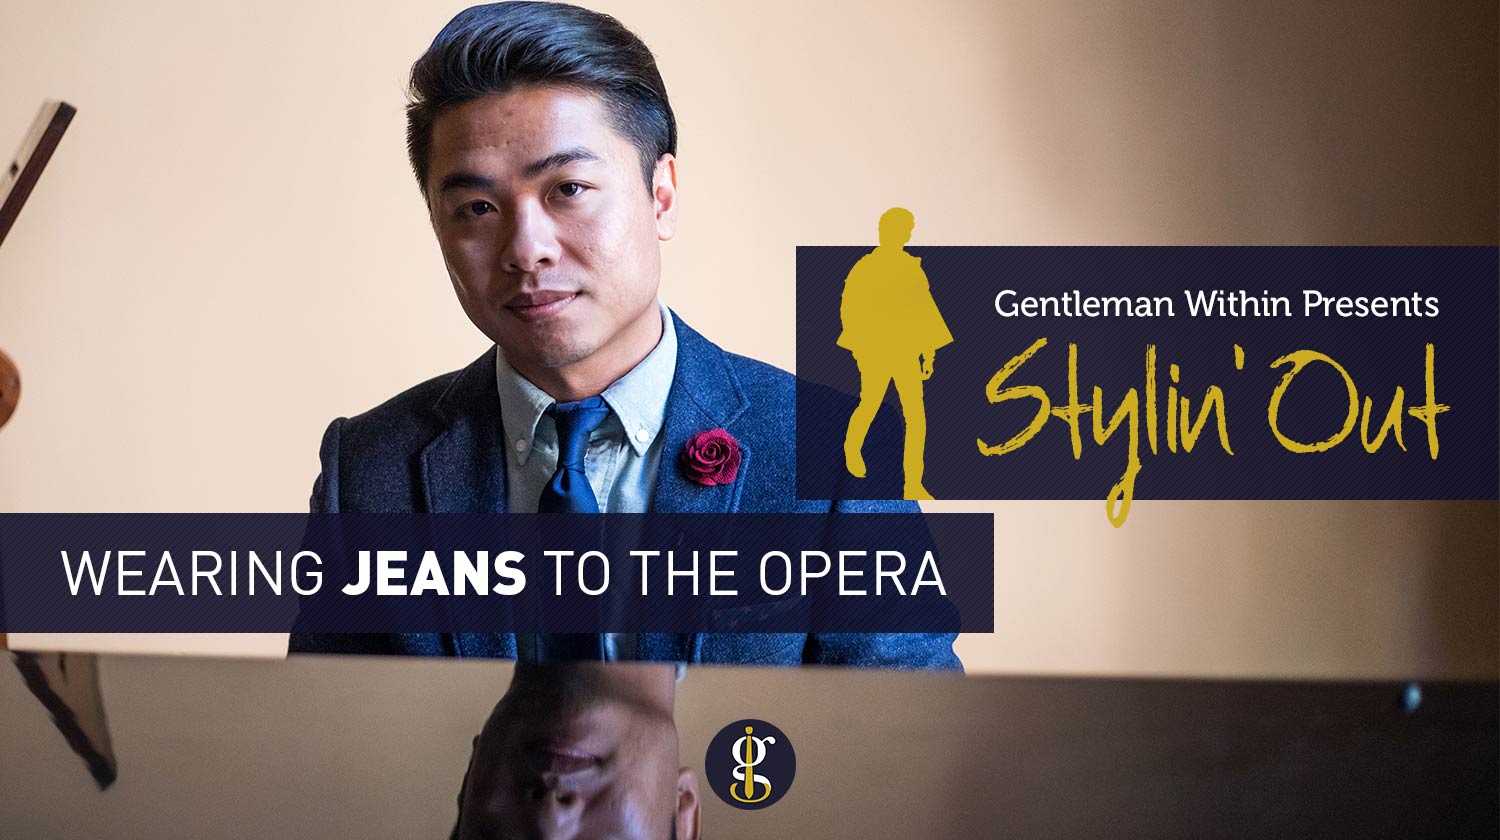 What To Wear To The Opera | GENTLEMAN WITHIN